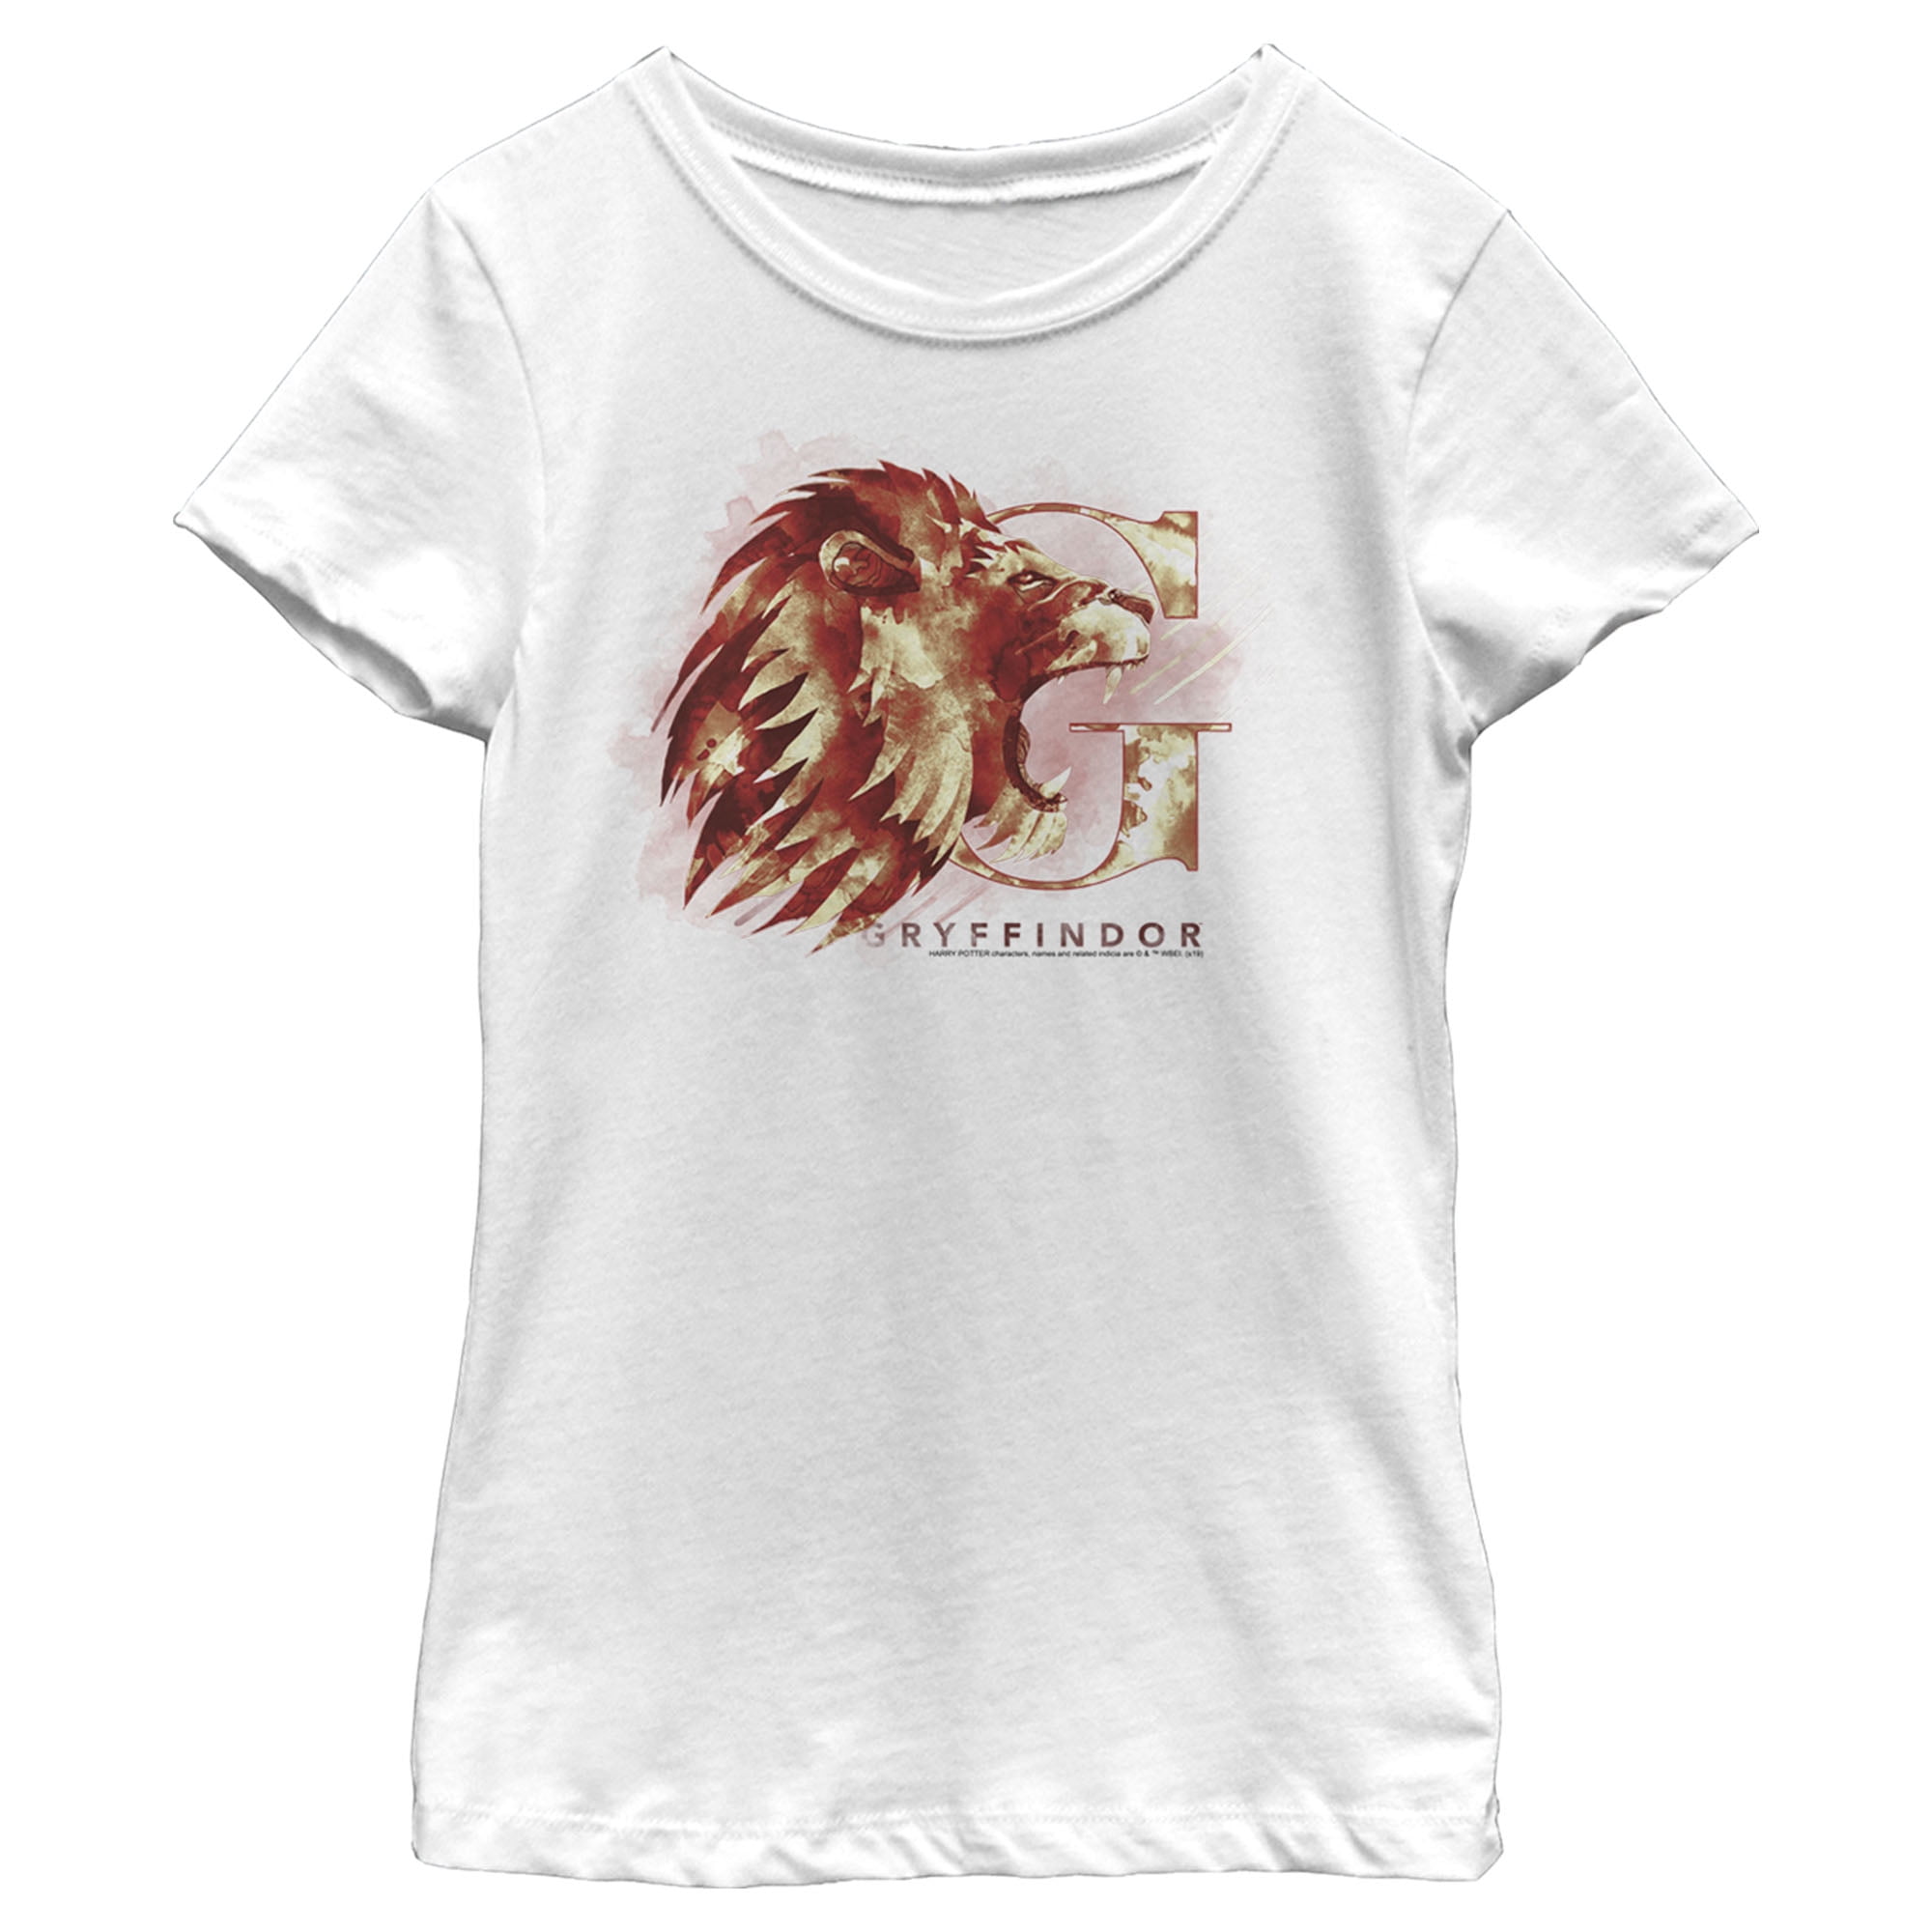 Harry Potter College Gryffindor Lion Graphic Tee Kids Gift Boys Girls T-Shirts 